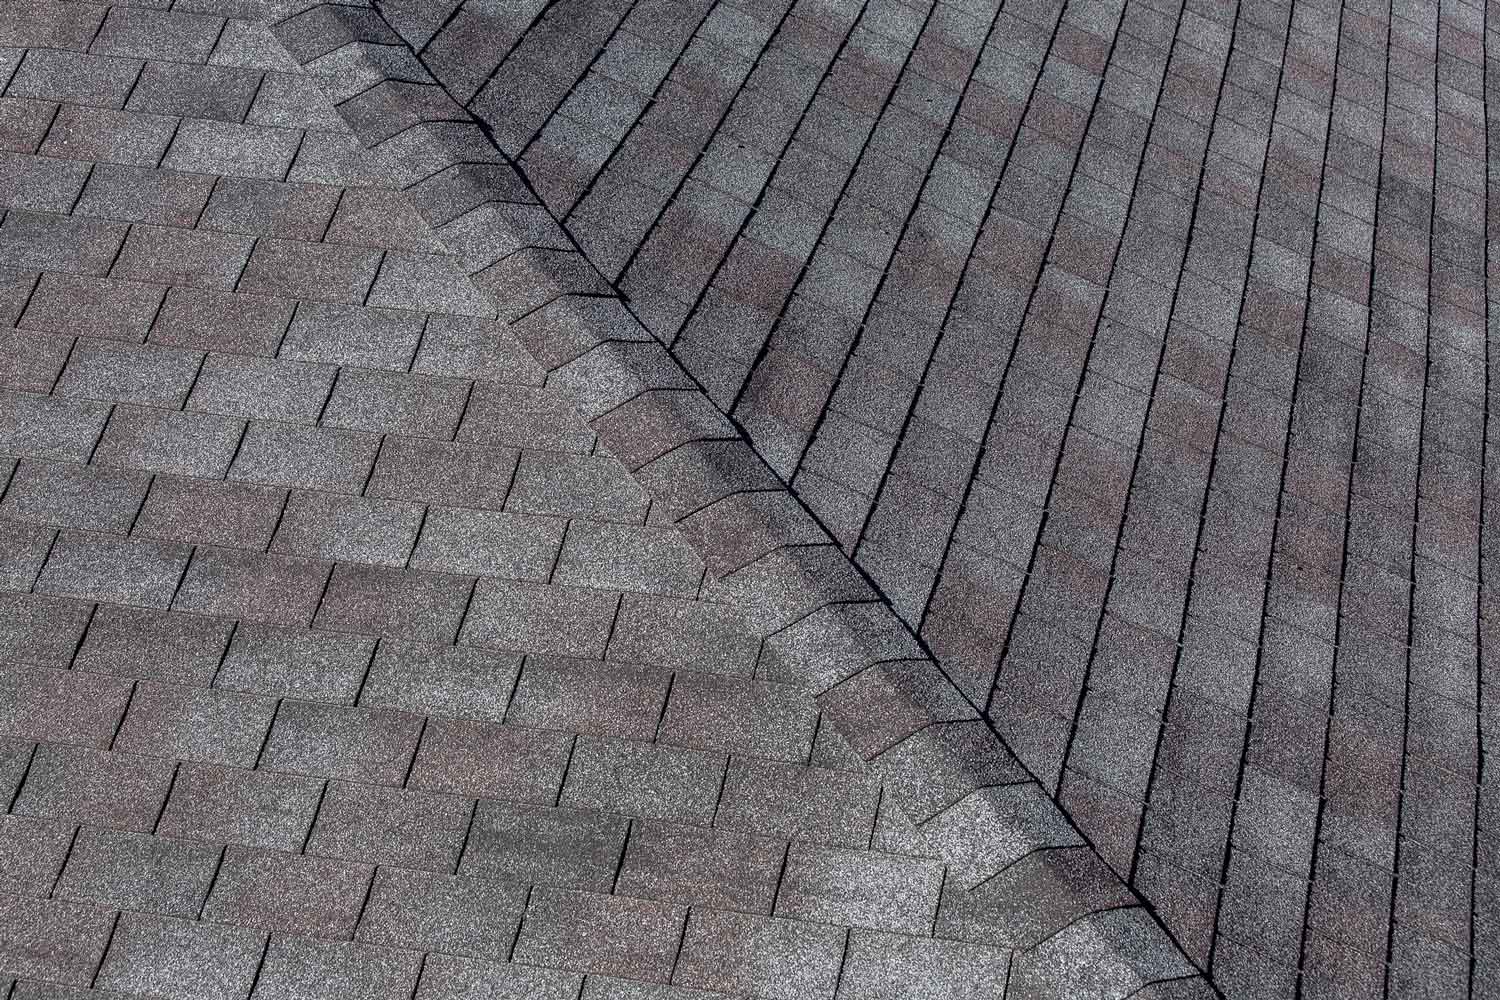 Trusted Local Roofing Contractor in Immokalee, FL